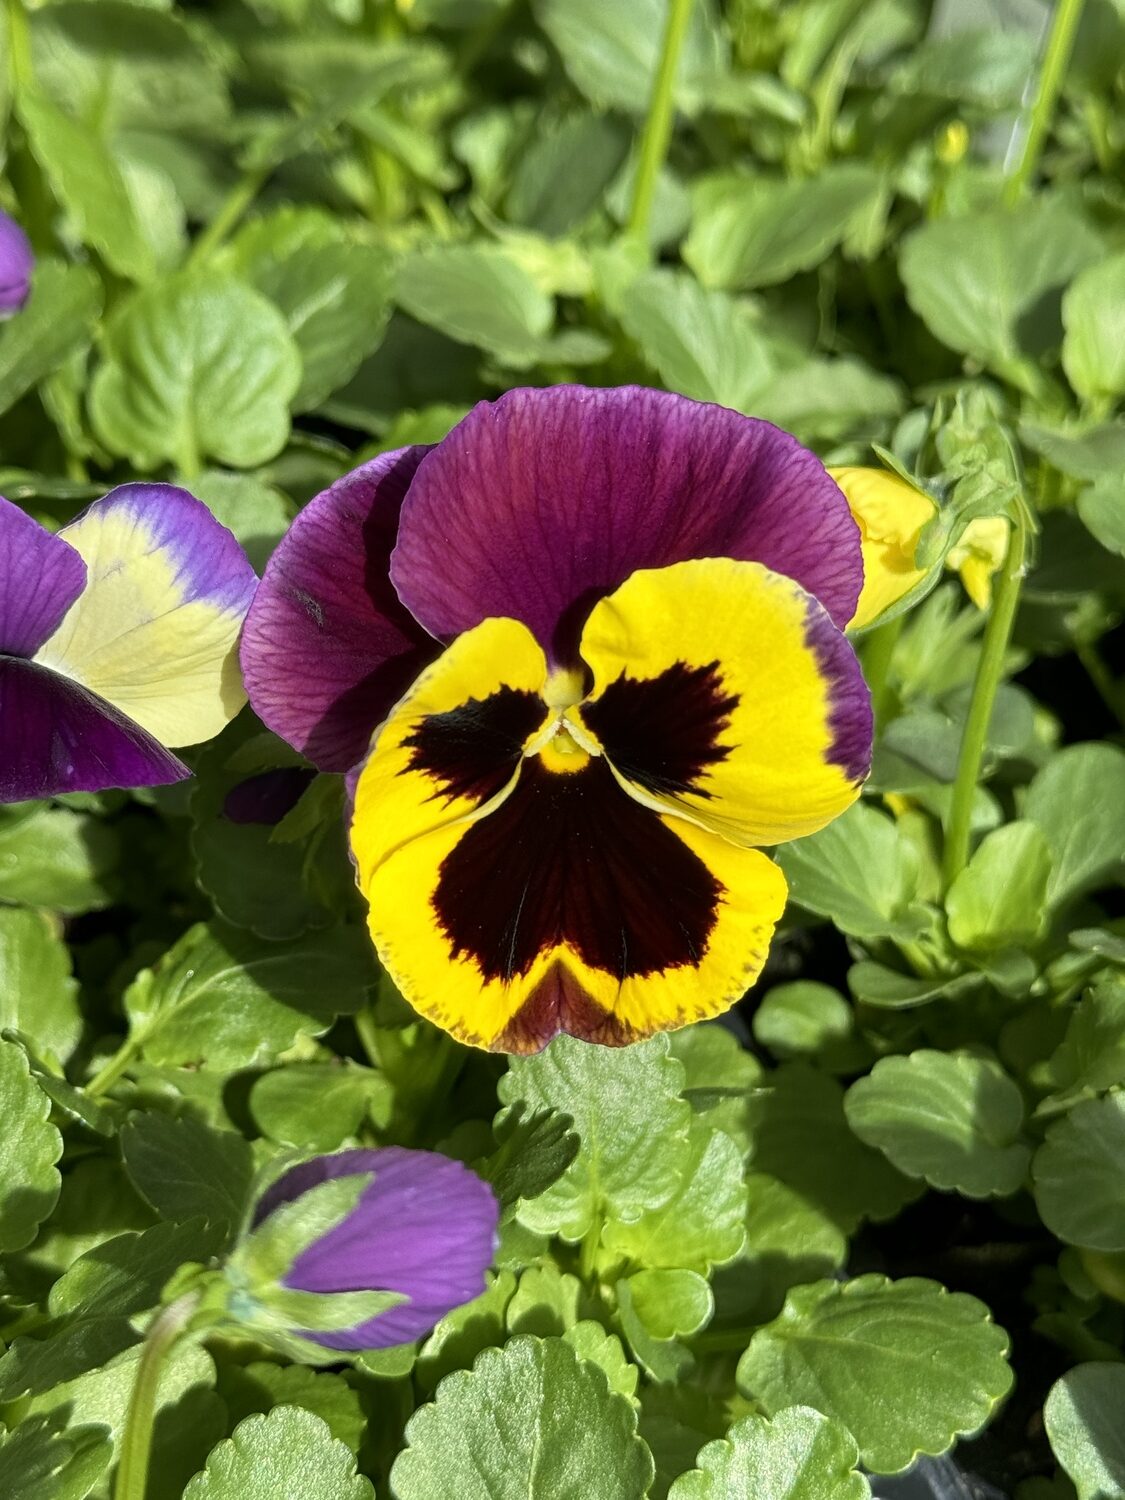 Pansies, which are now in garden centers in pots and packs, are great for kids to plant outdoors. New flowers appear almost every day and will continue until the heat of summer.
ANDREW MESSINGER